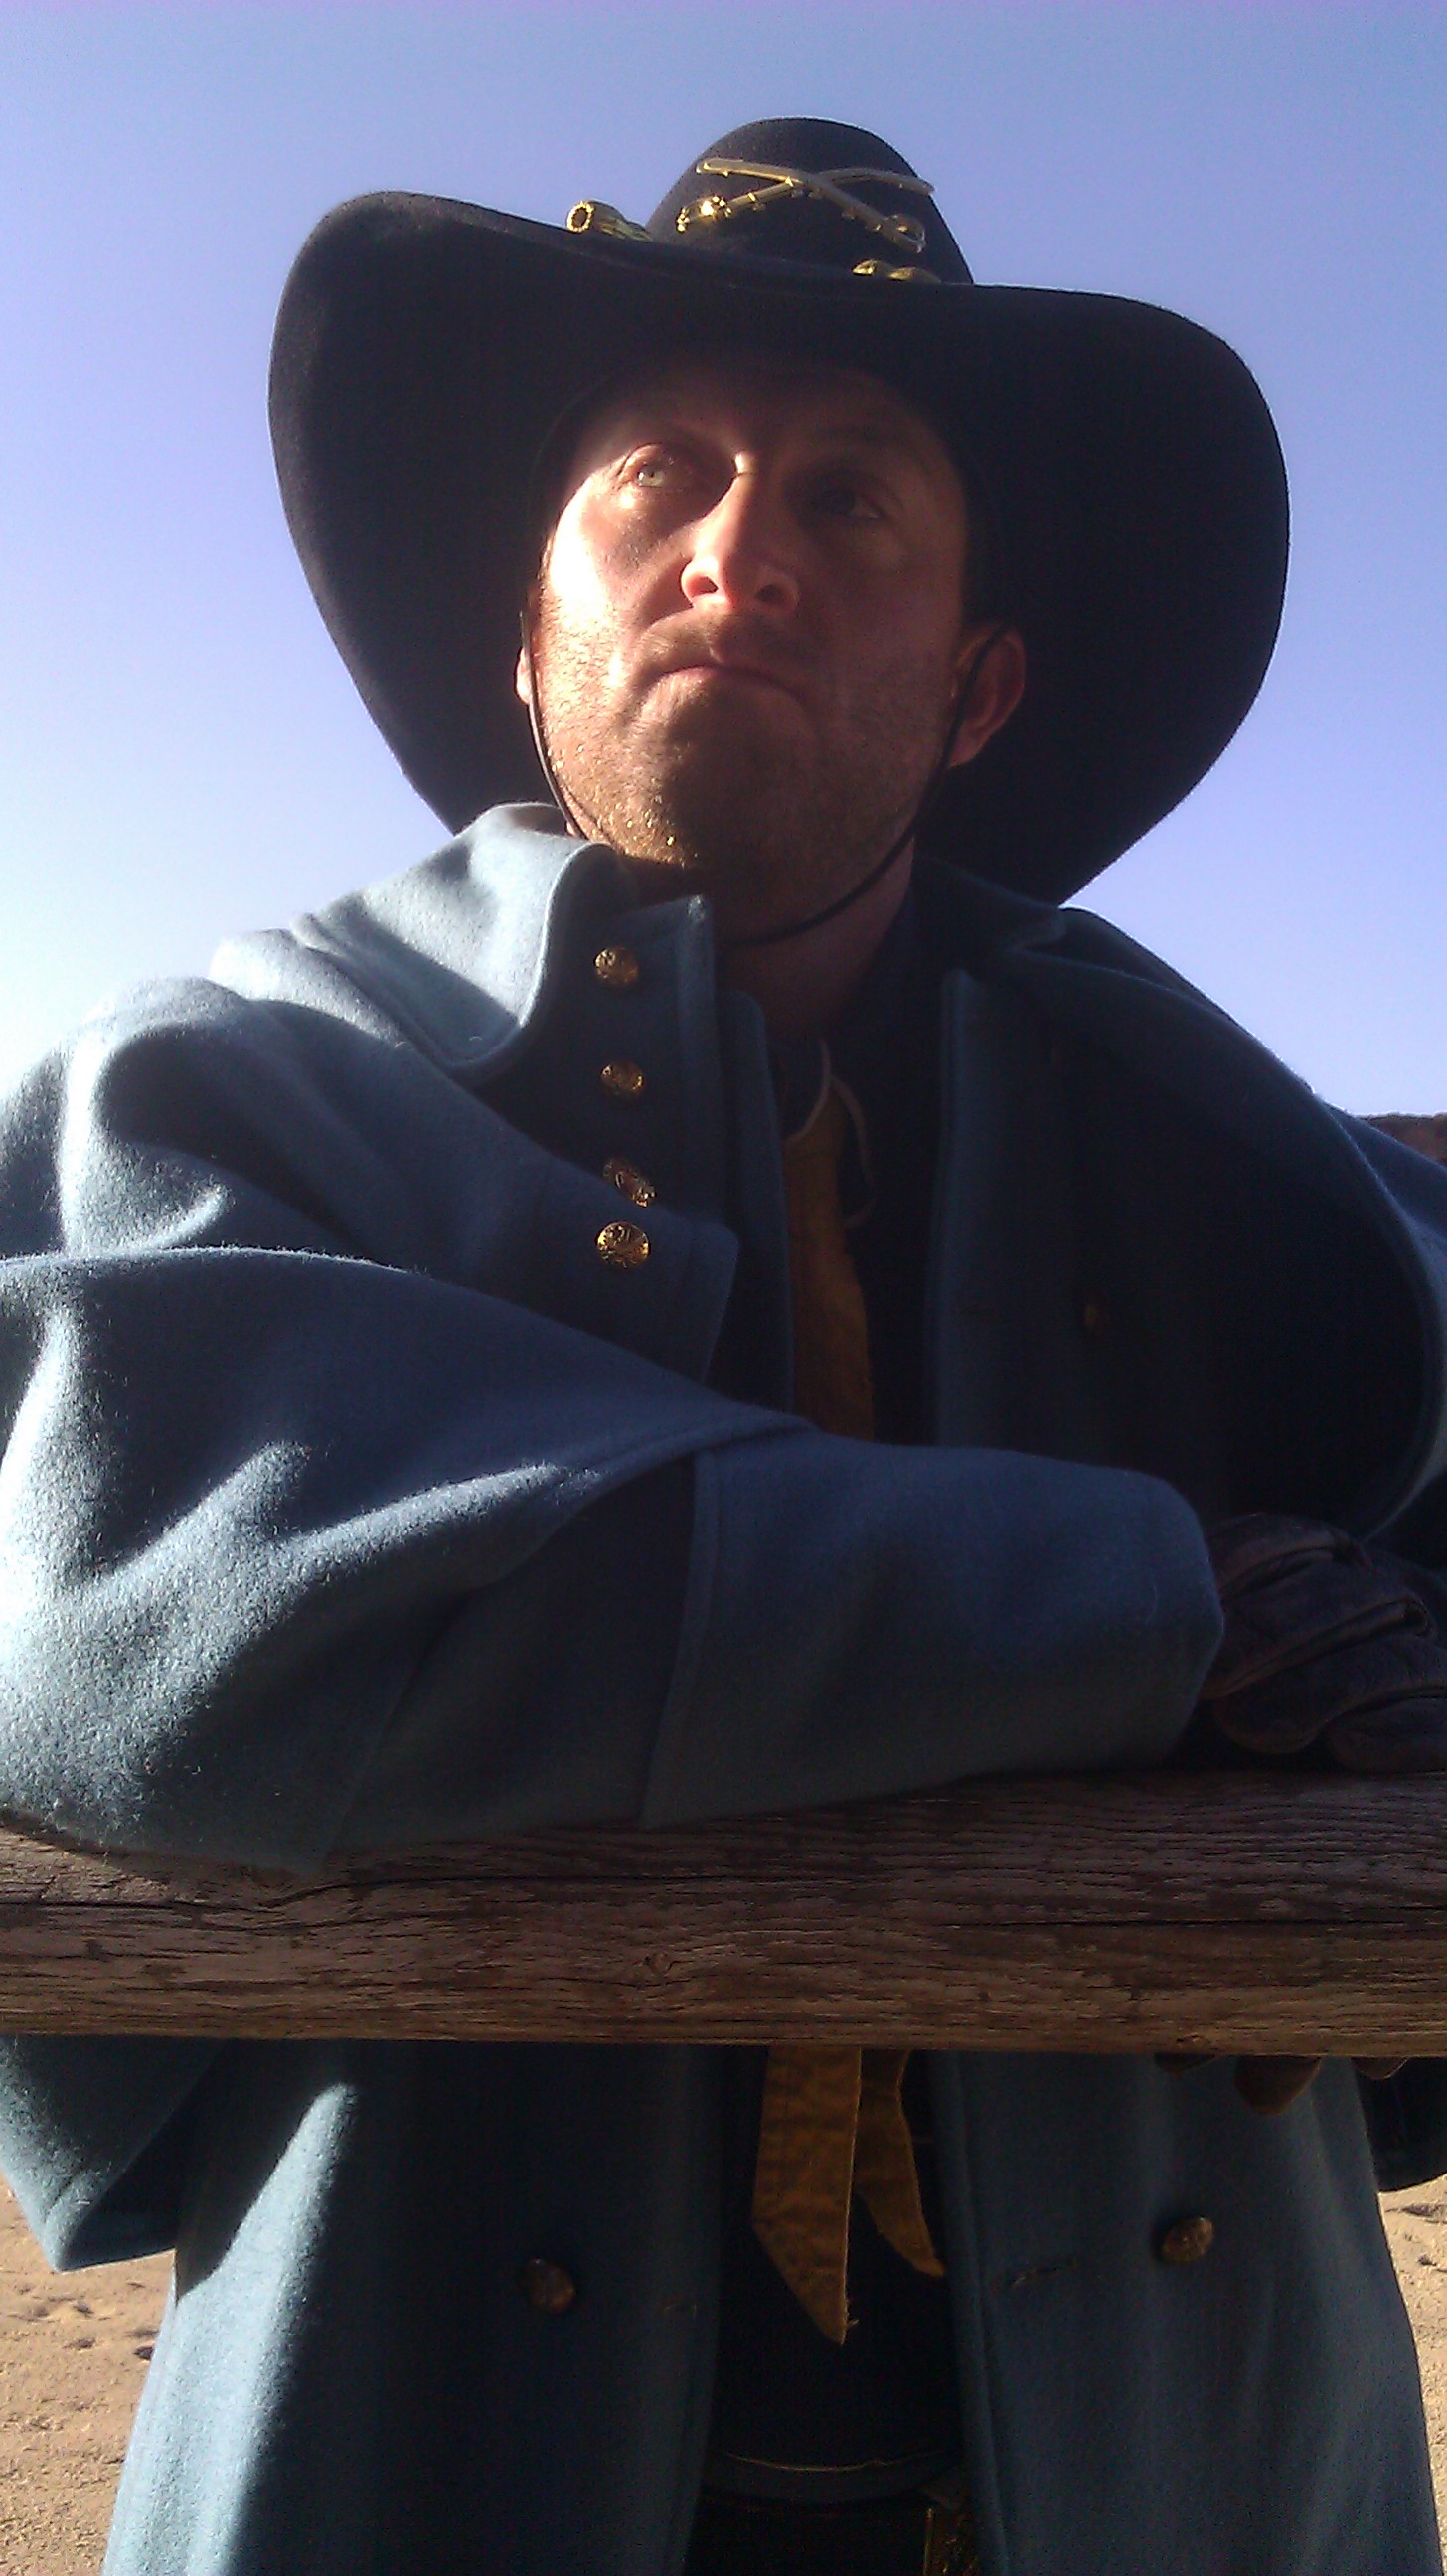 Playing the villain in a webseries called Tales of The Frontier, this is me in my role of Captain Barnett